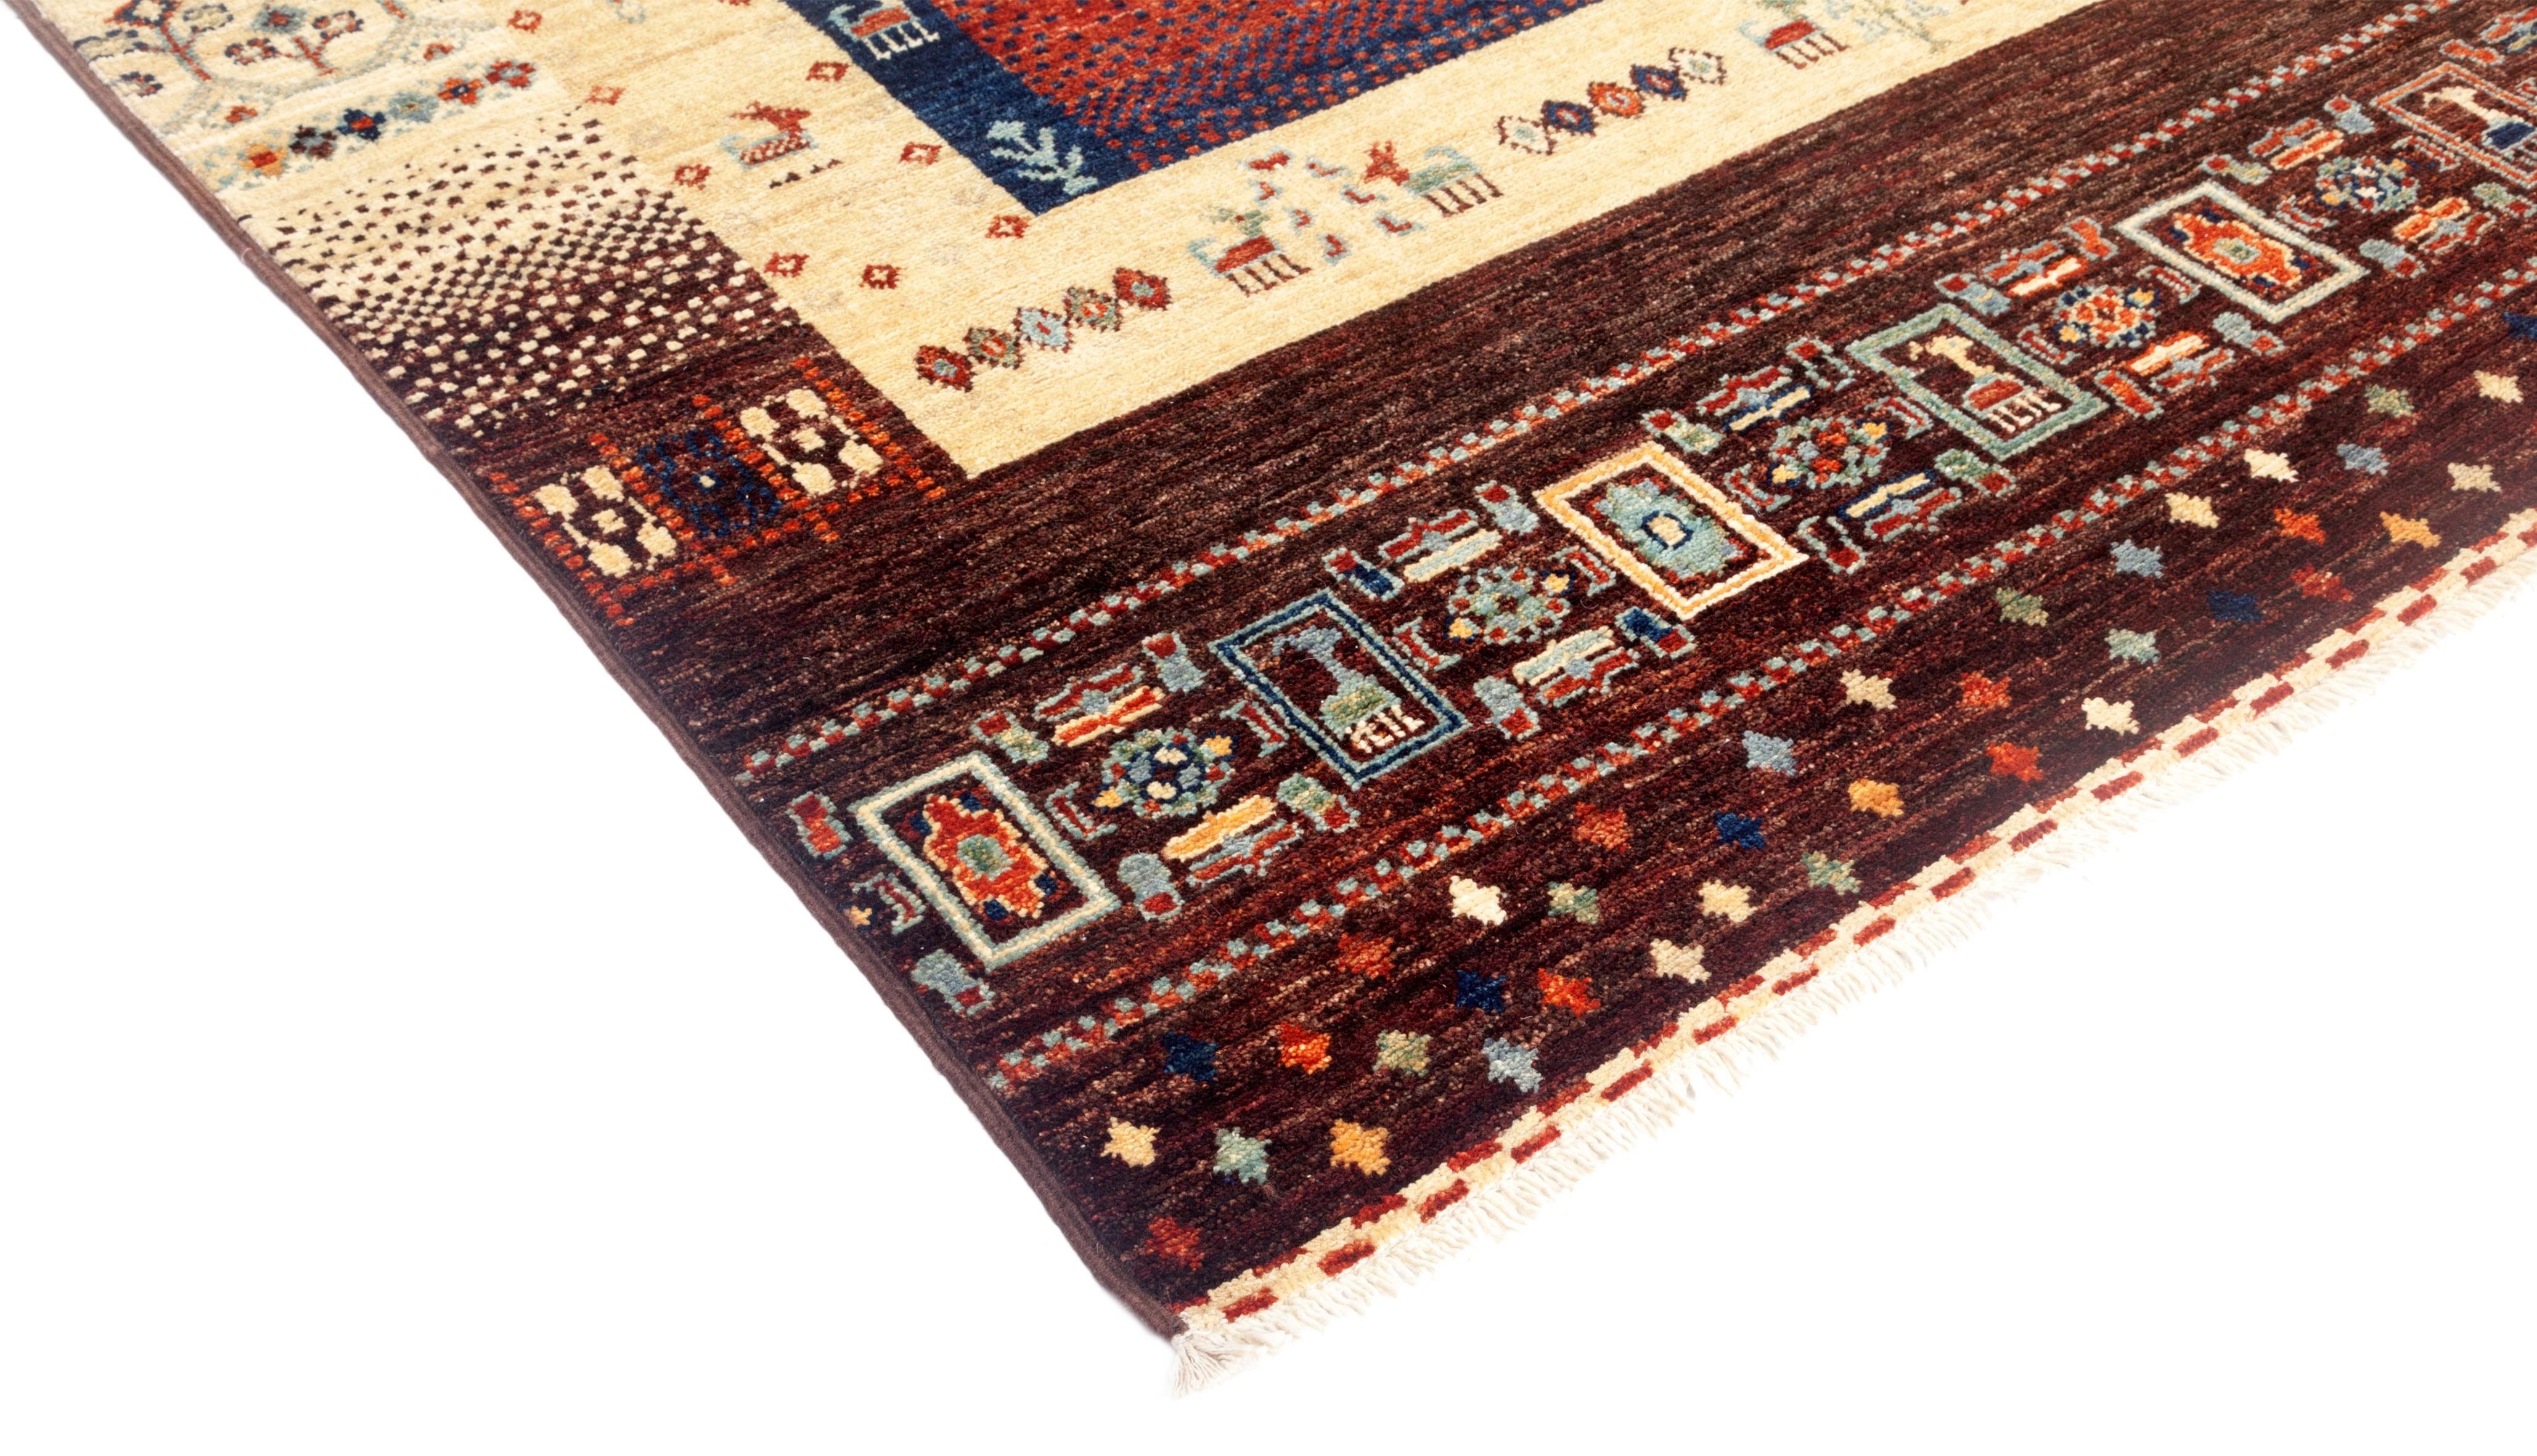 The Tribal area rug collection has two distinct directions. One is extremely colorful, with horizontally striped runners and area rugs whose designs derive from Persian flat-woven textiles. The other vector is based upon Baluchi prayer rugs from